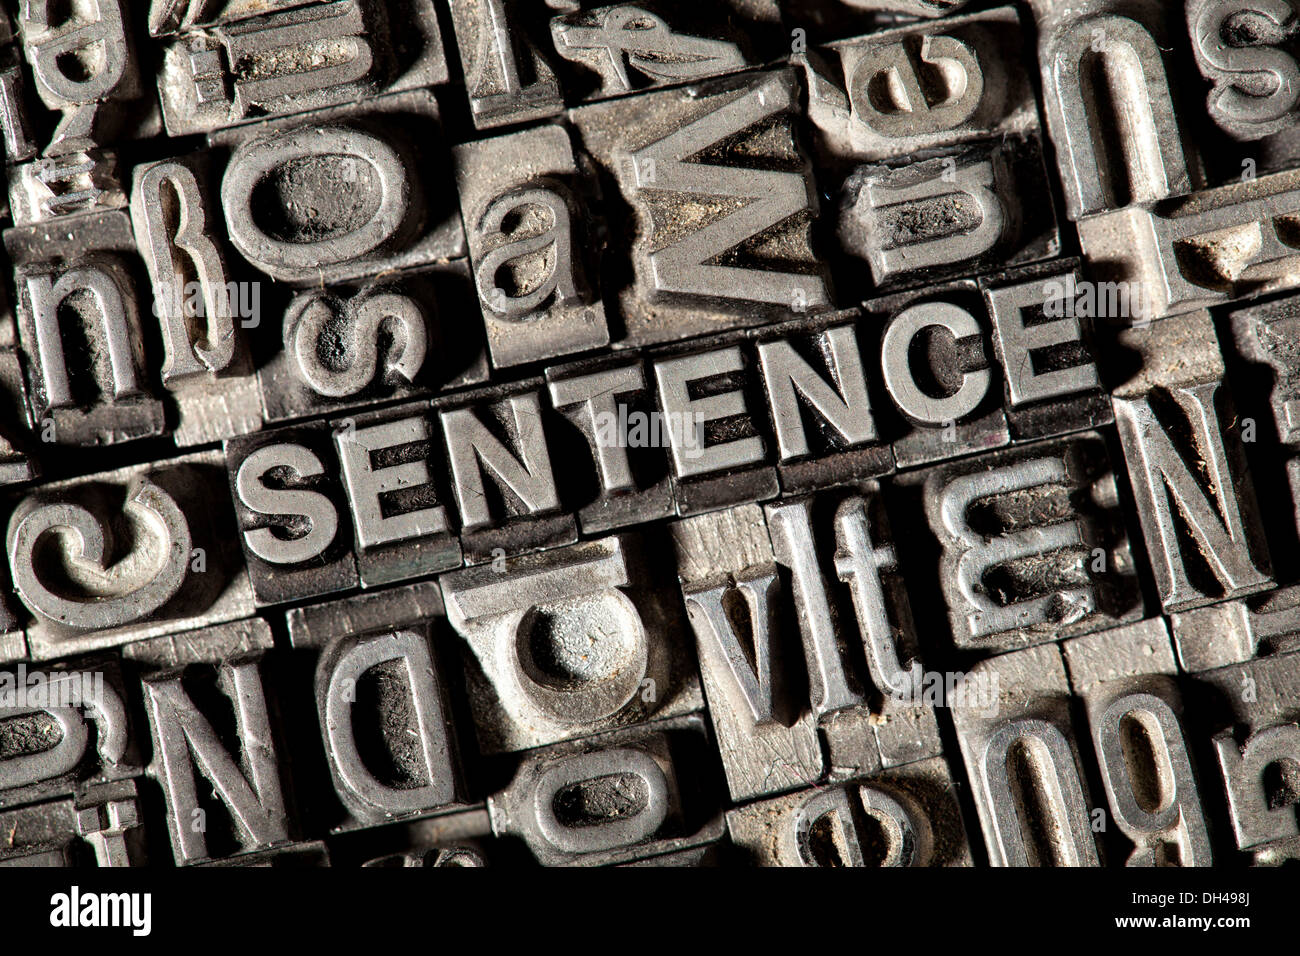 Old lead letters forming the word SENTENCE Stock Photo